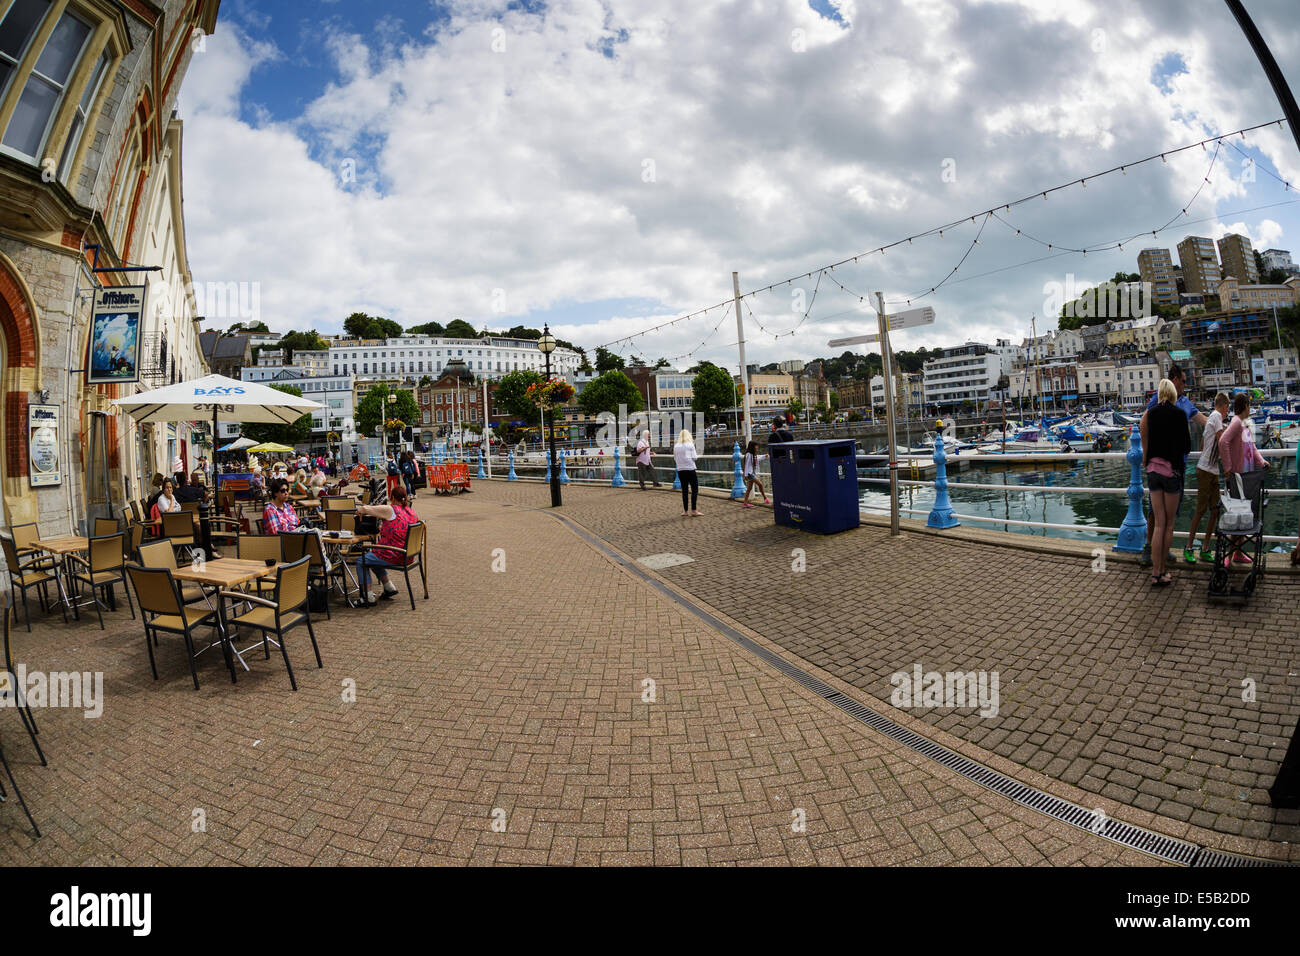 Shops Torquay High Resolution Stock Photography and Images - Alamy